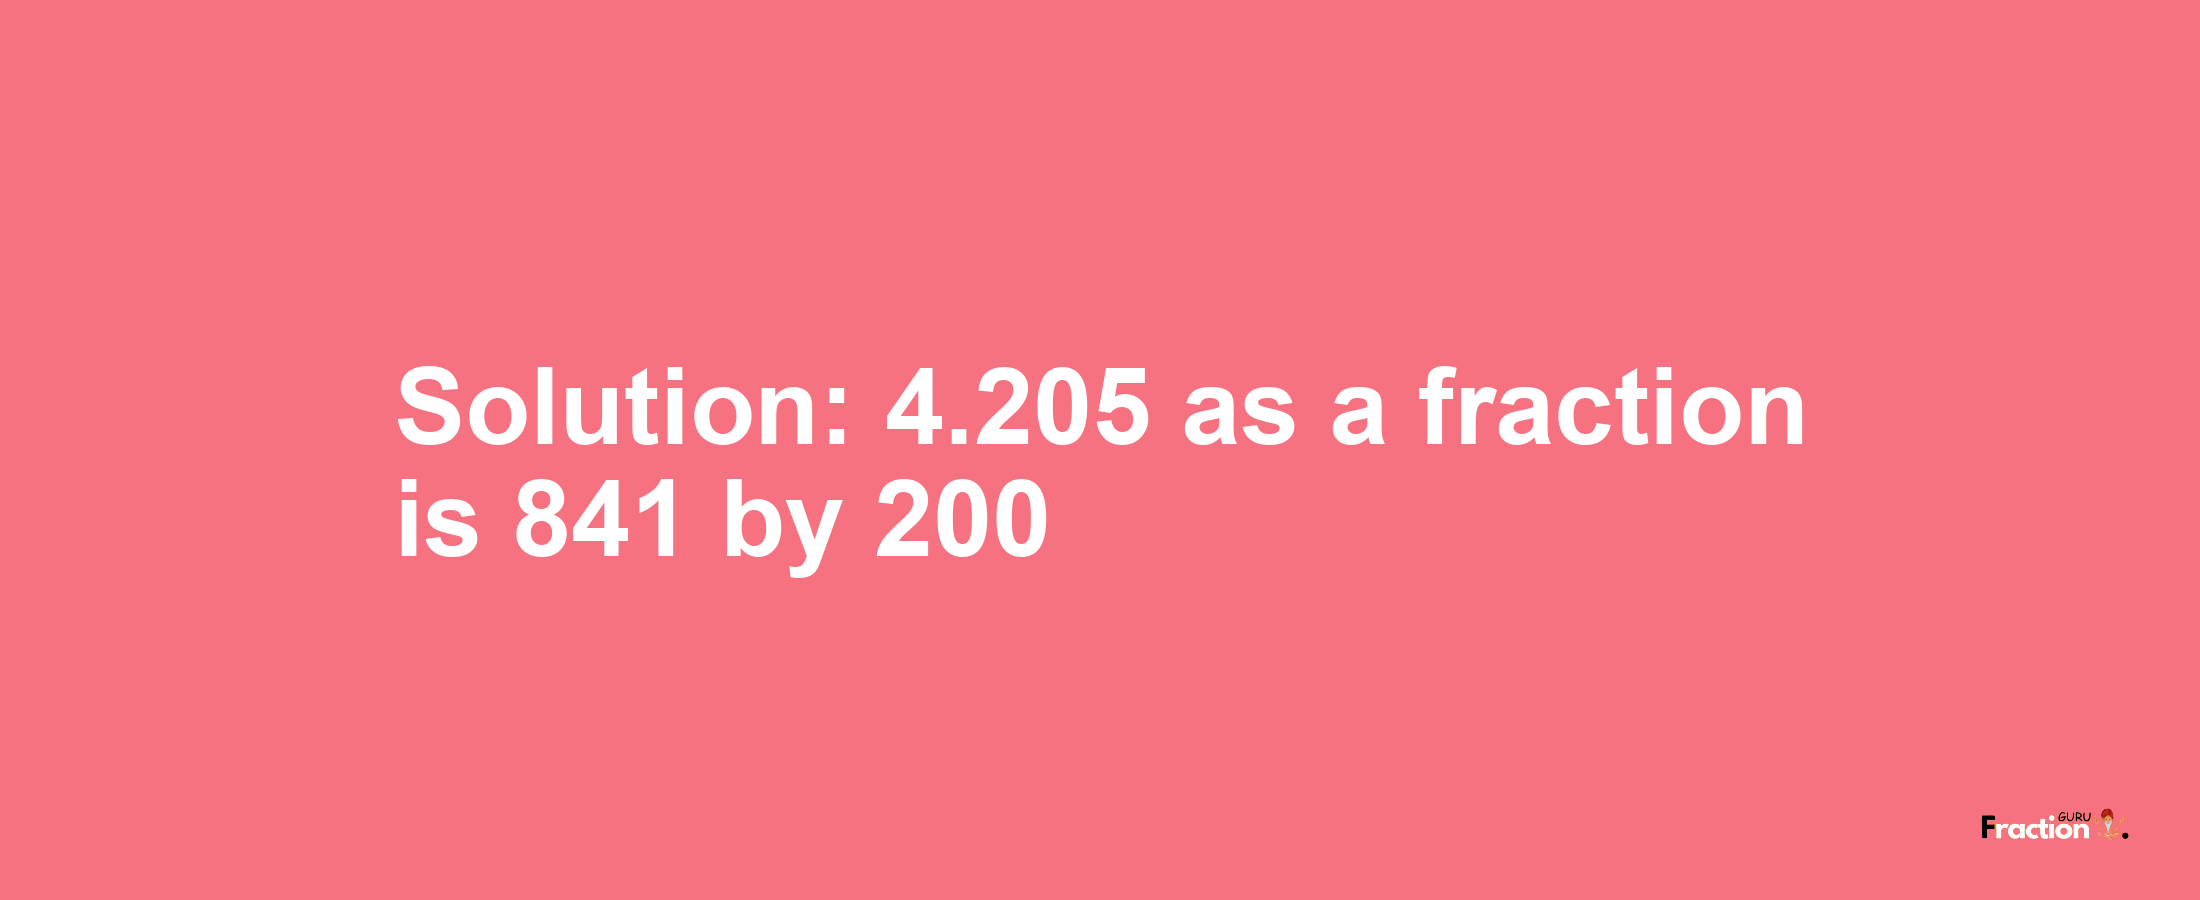 Solution:4.205 as a fraction is 841/200